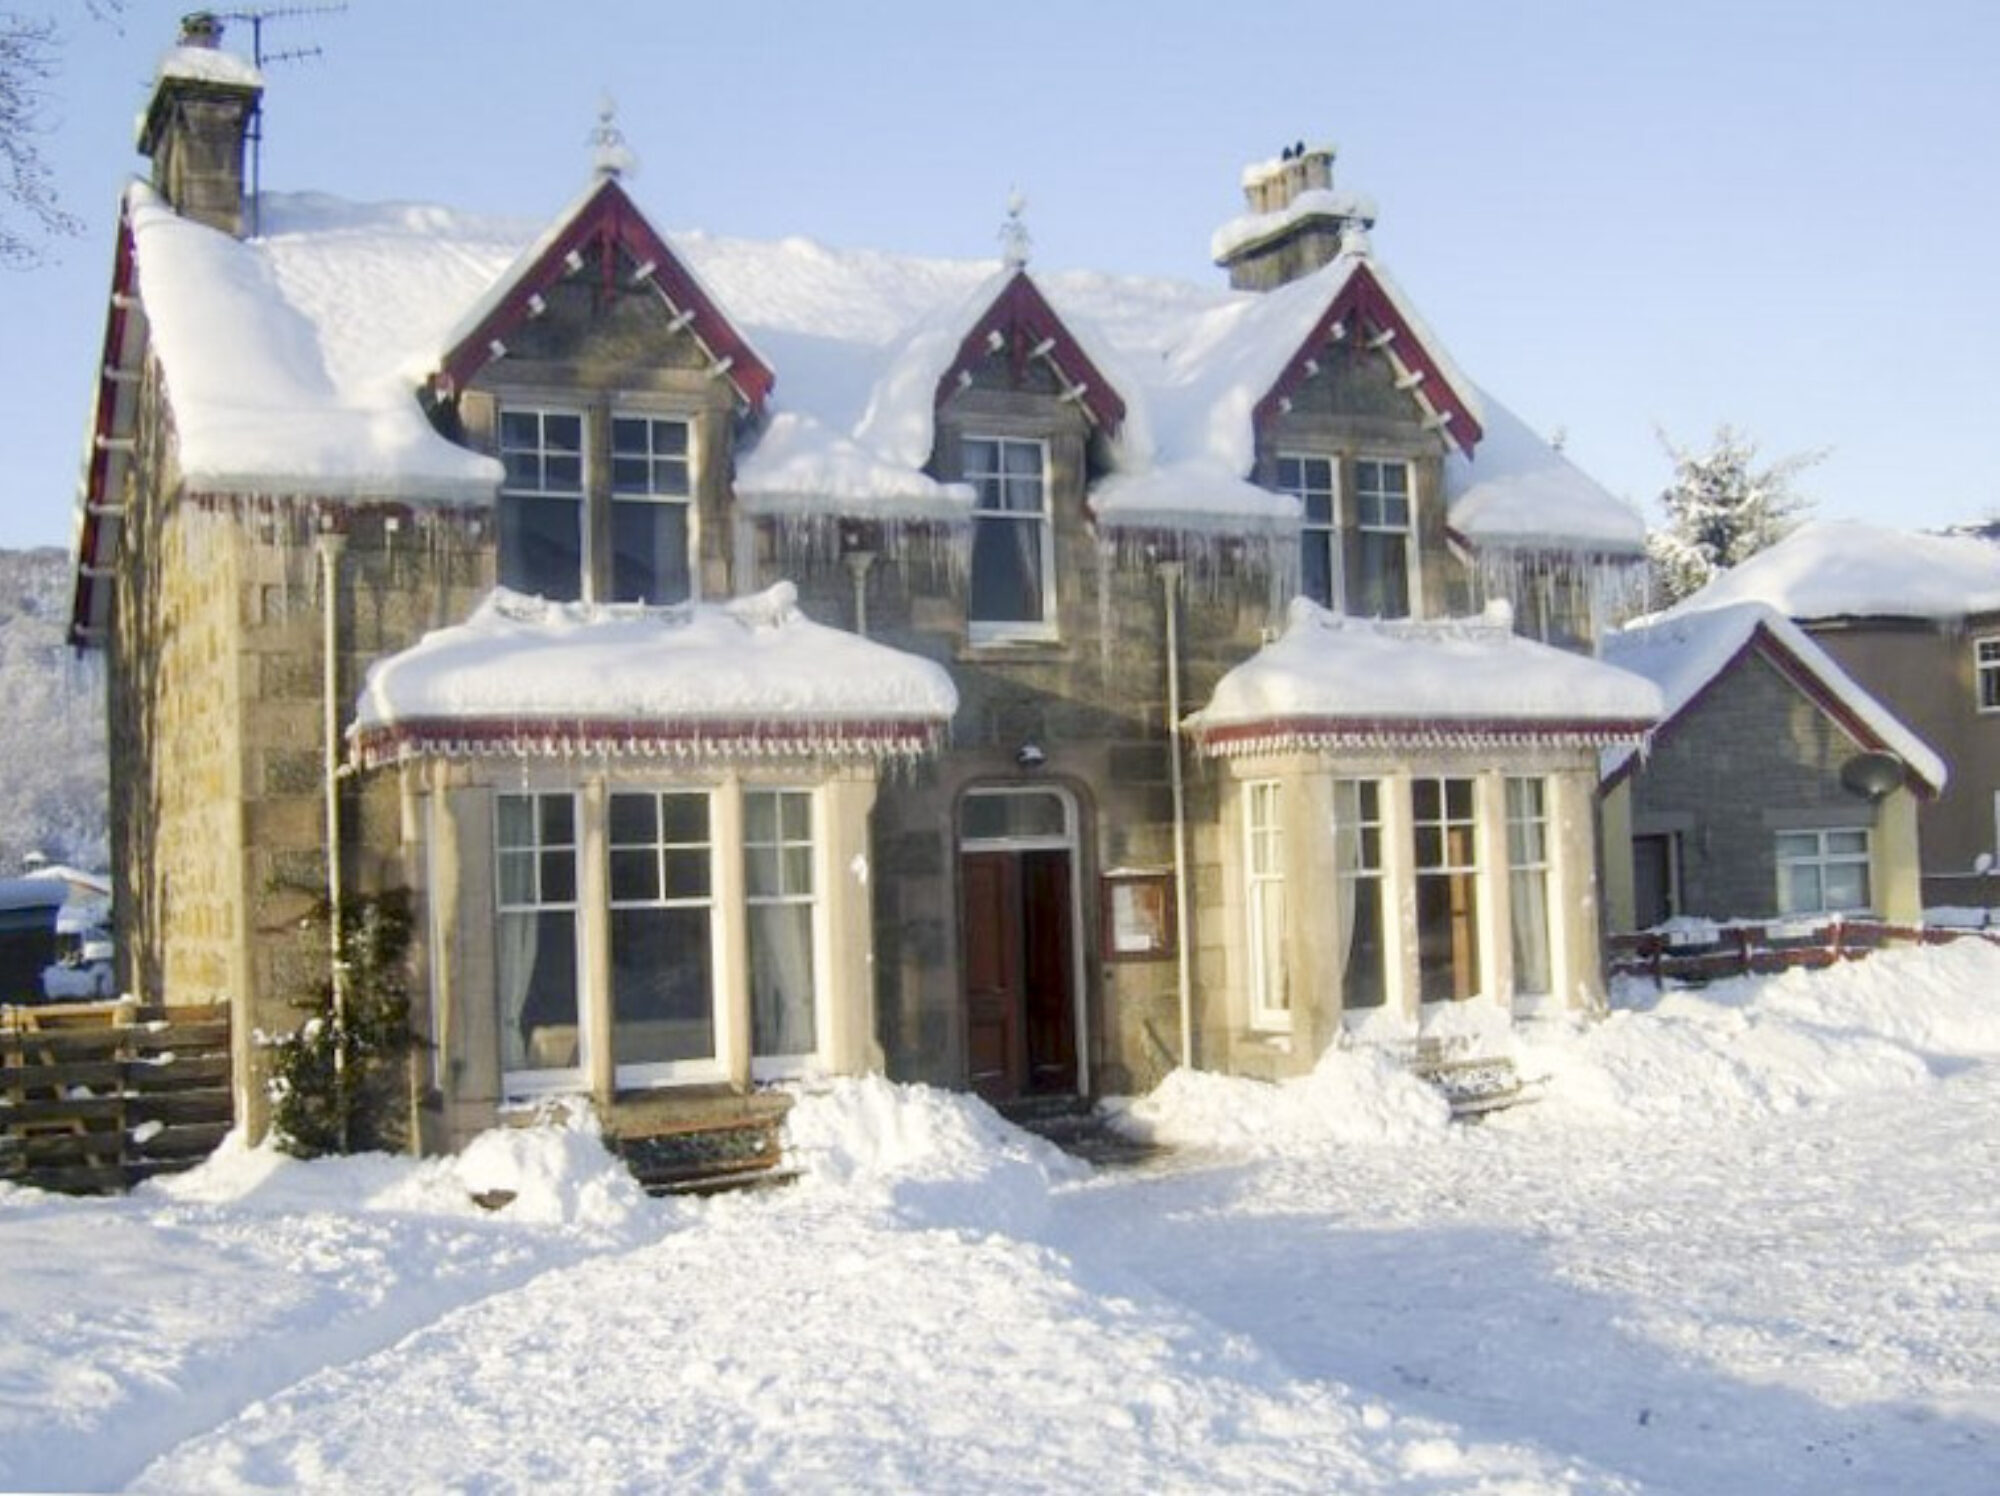 Snowy house in Aviemore, Scottish Highlands